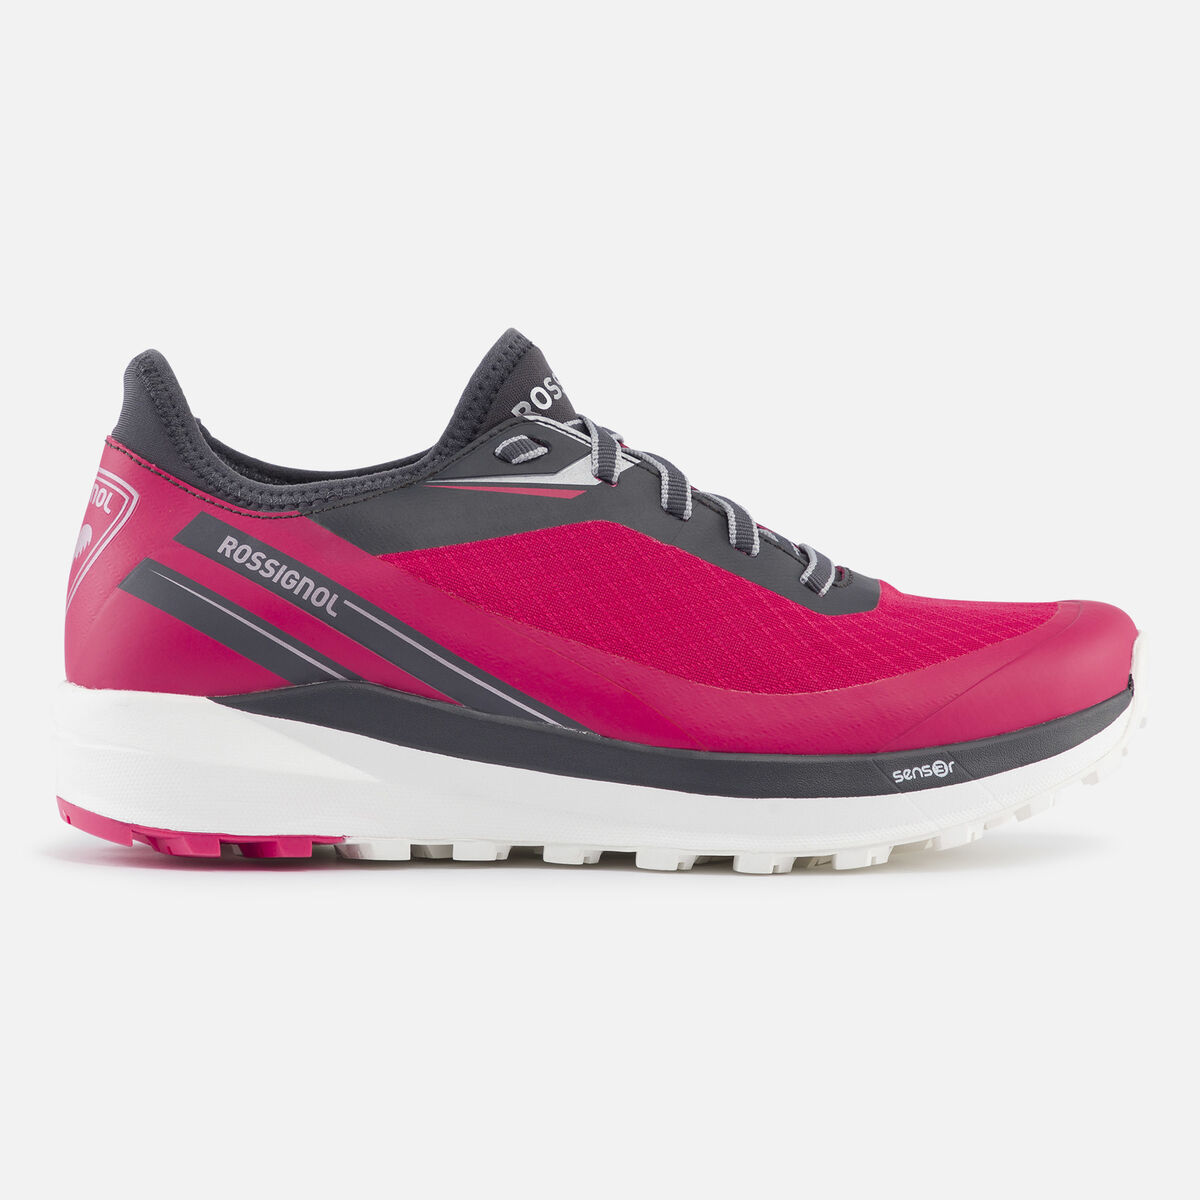 Zapatillas impermeables Active Outdoor para mujer, Mujer